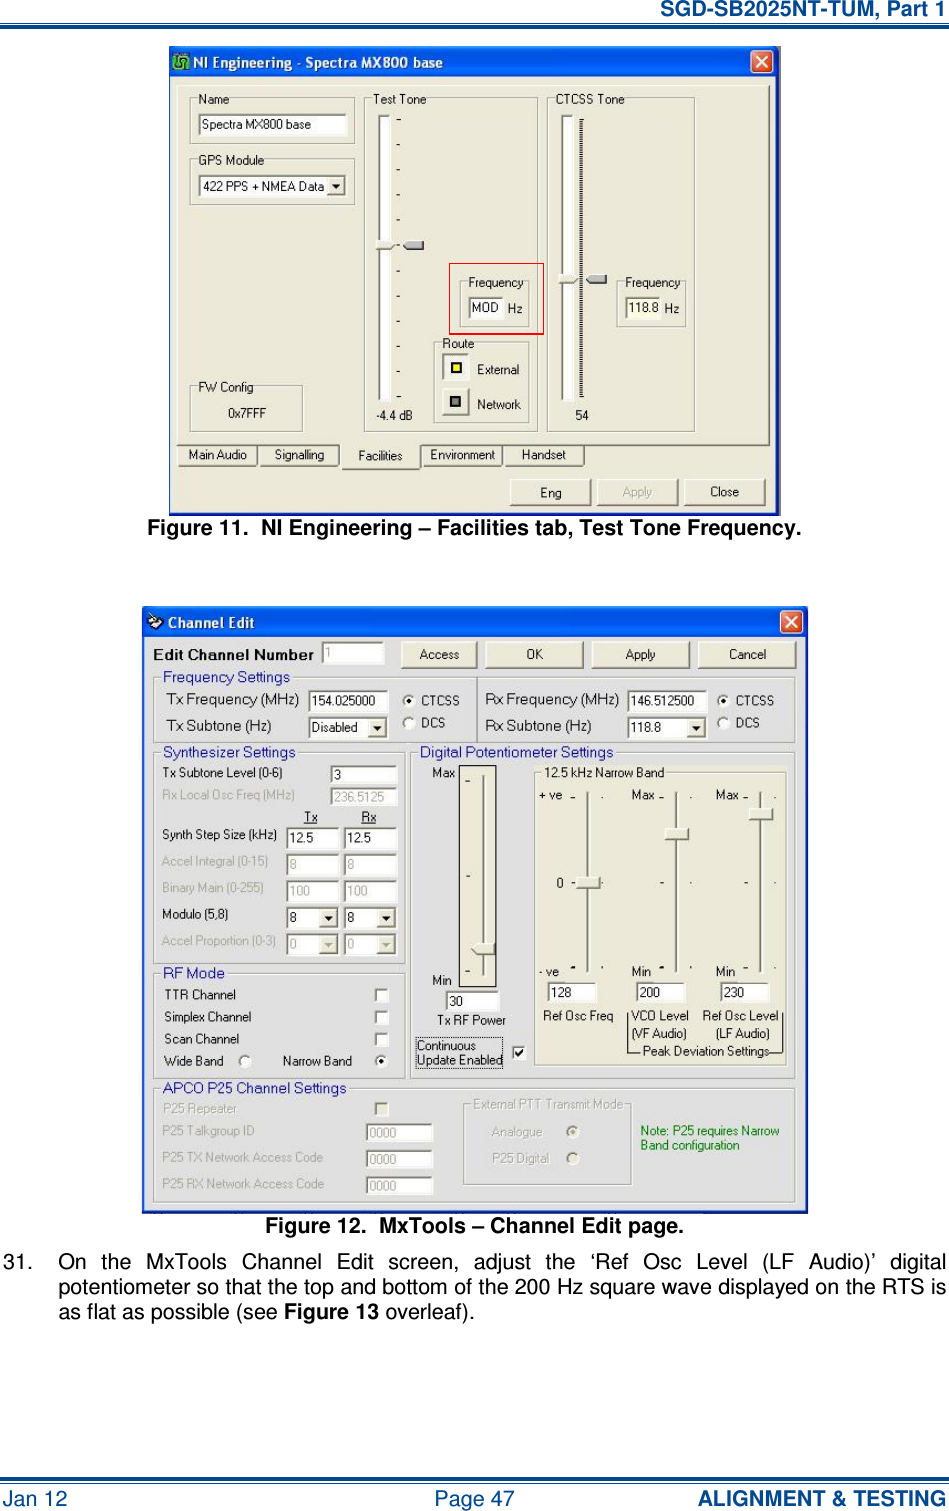   SGD-SB2025NT-TUM, Part 1 Jan 12  Page 47  ALIGNMENT &amp; TESTING Figure 11.  NI Engineering – Facilities tab, Test Tone Frequency.  Figure 12.  MxTools – Channel Edit page. 31.  On  the  MxTools  Channel  Edit  screen,  adjust  the  ‘Ref  Osc  Level  (LF  Audio)’  digital potentiometer so that the top and bottom of the 200 Hz square wave displayed on the RTS is as flat as possible (see Figure 13 overleaf). 